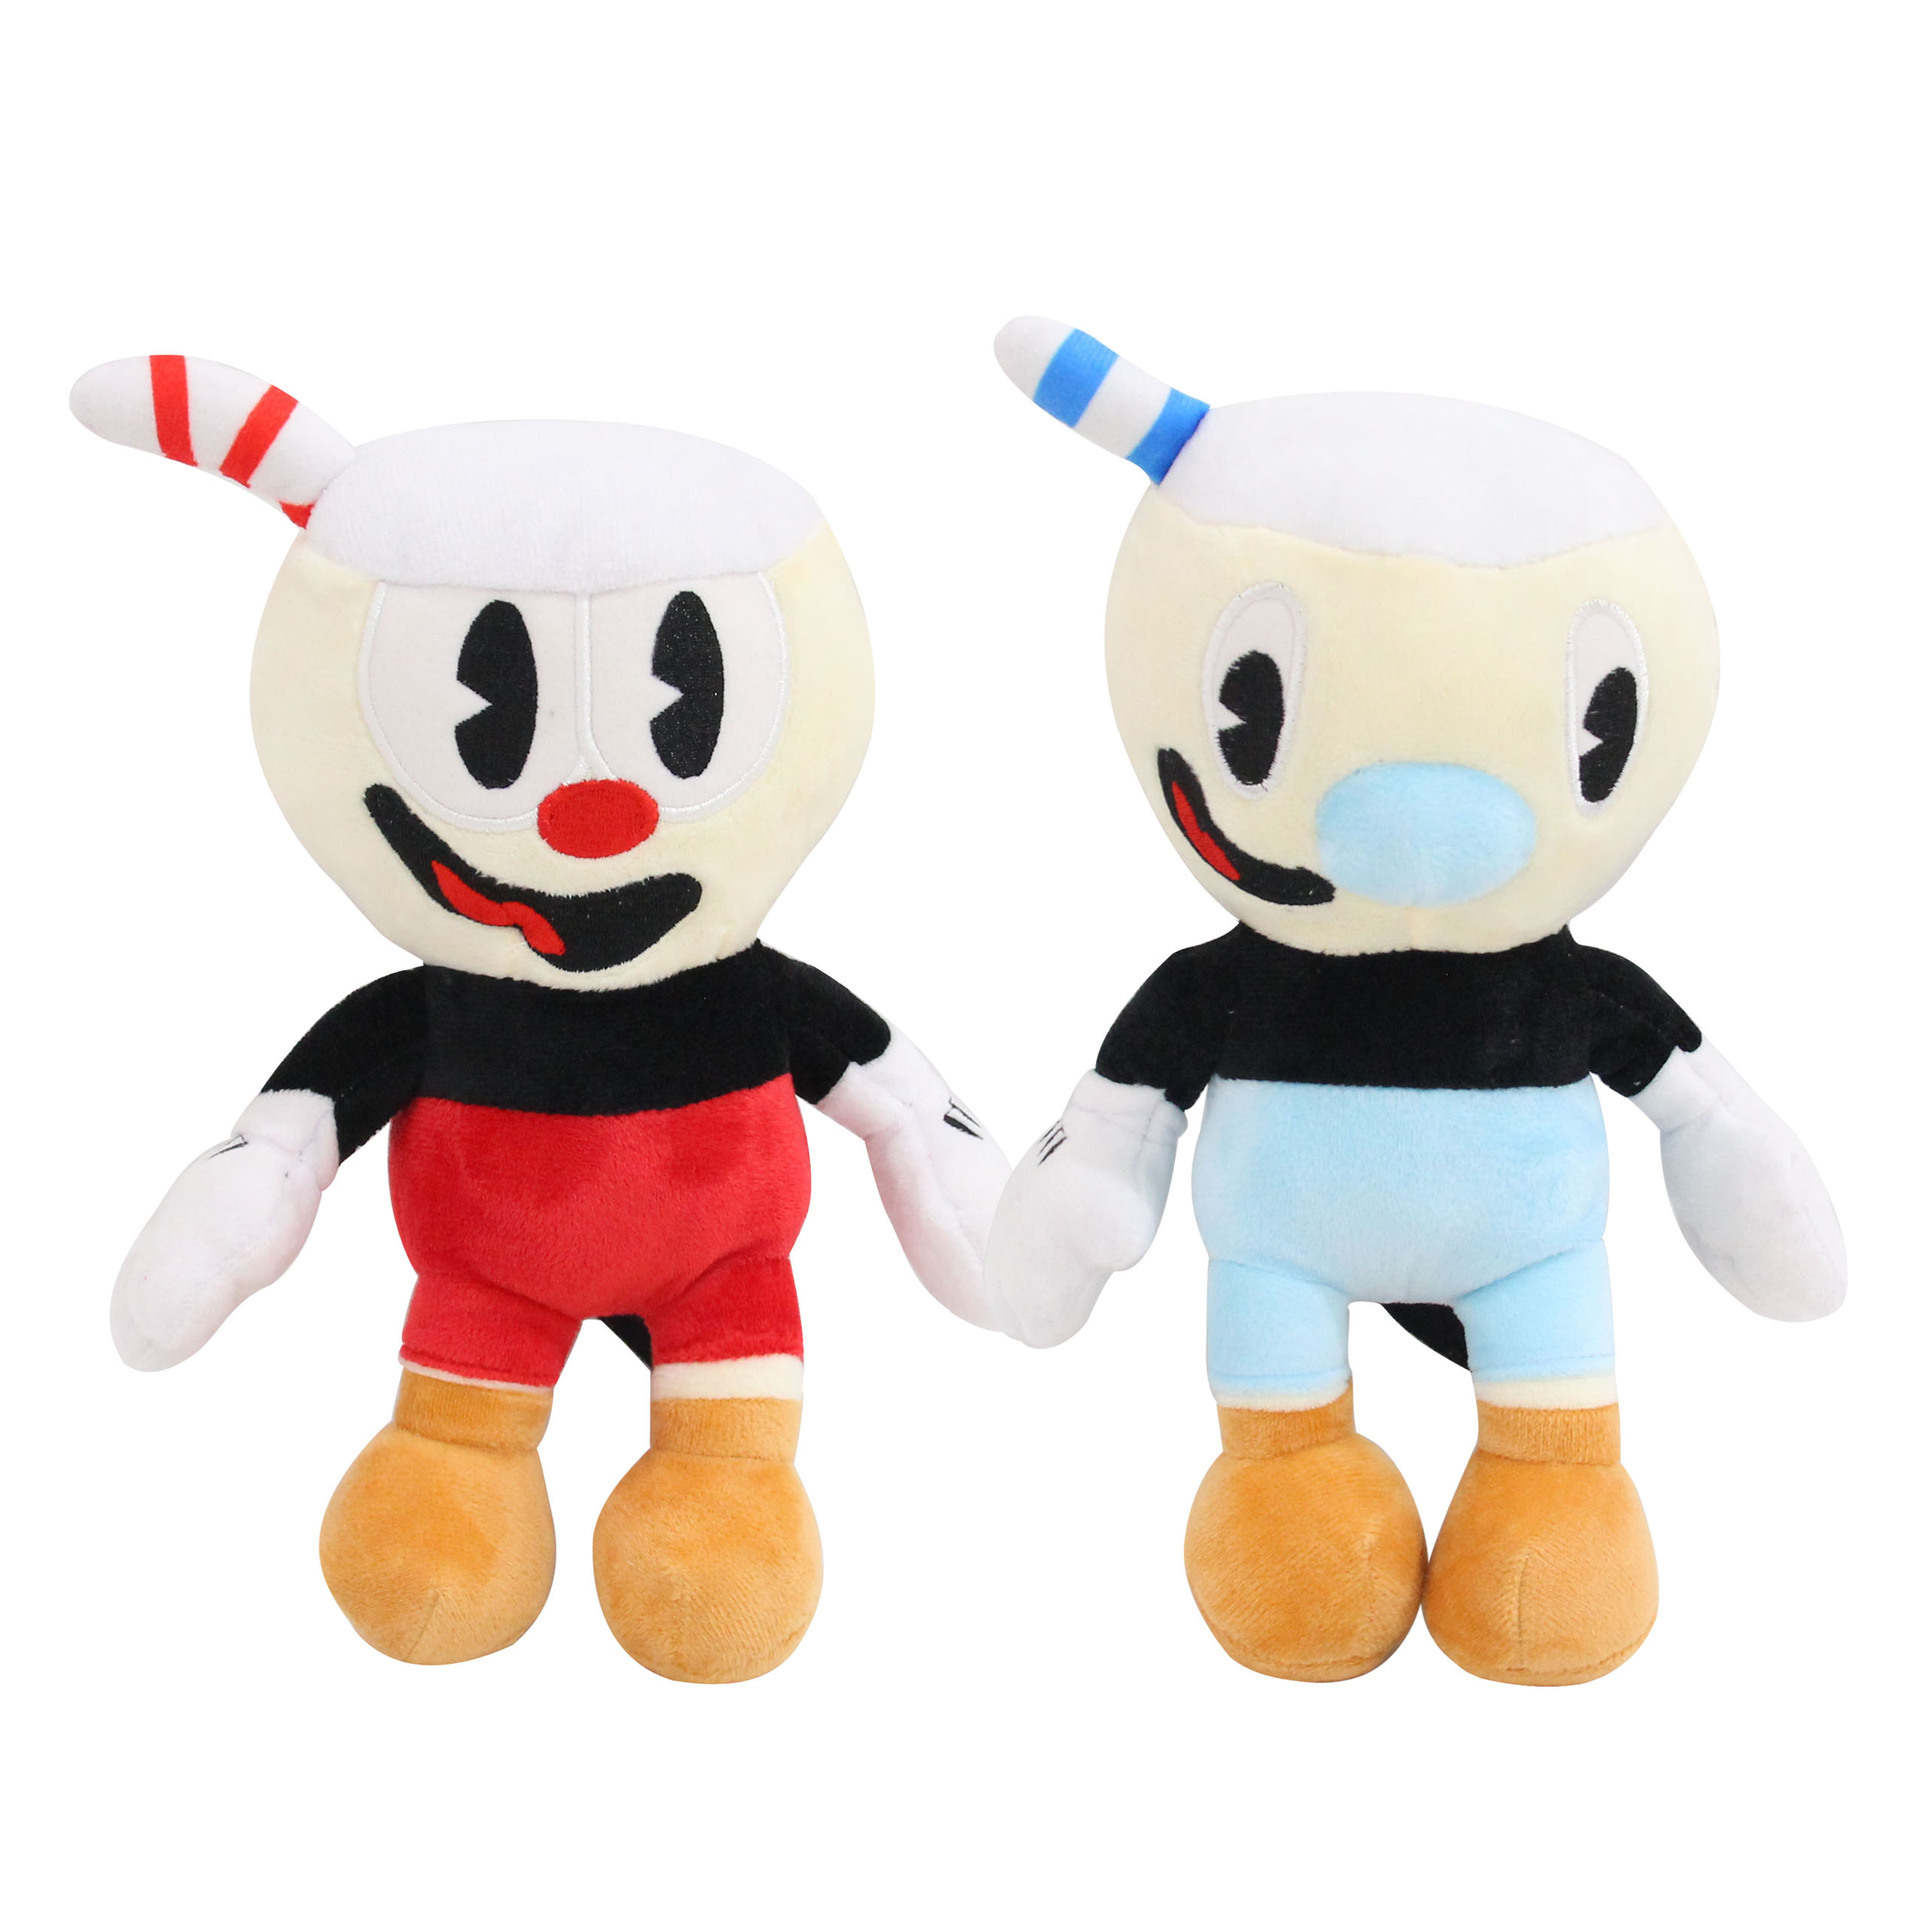 The Cuphead Show! – The Cuphead Show : Officially Licensed Store